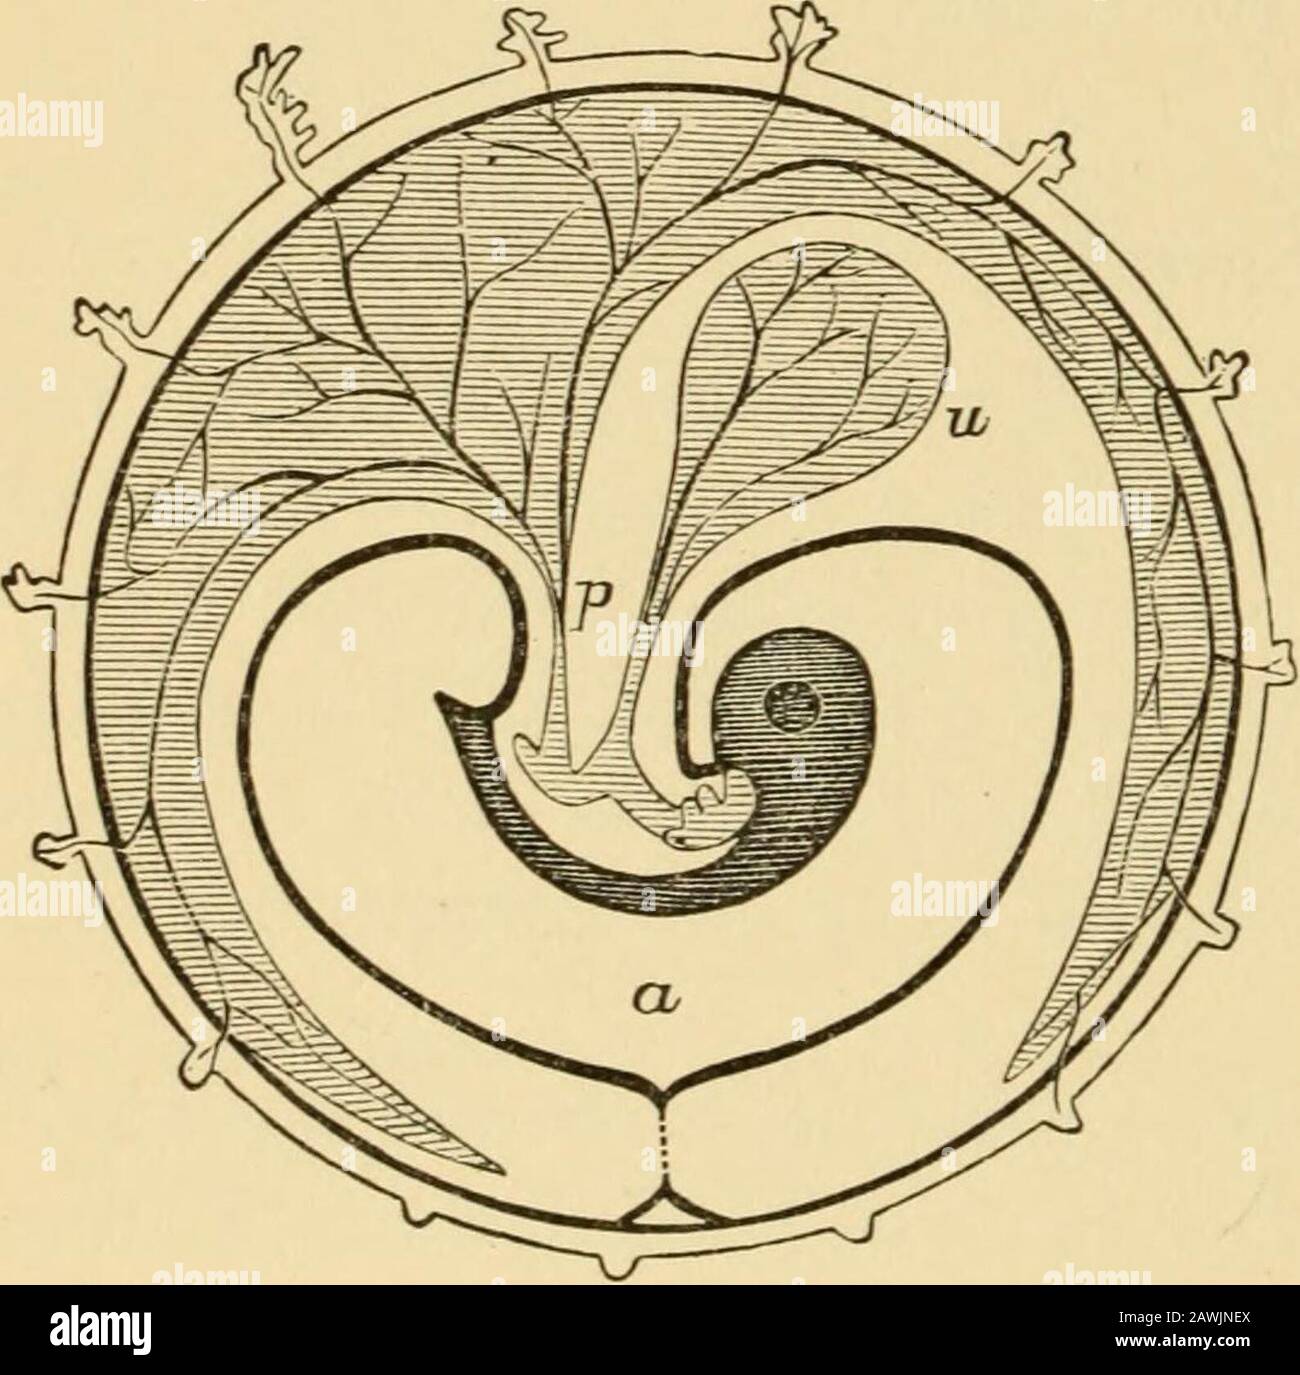 A system of obstetrics . c umbilicus;cac, amnio-chorional cavity; pp, pleuro-peritoneal cavity: ch, chorion; mv, vitel-line membrane ; vo, umbilical vesicle. gradually more and more dis-tended by the accumulation offluid until the membrane whichcontains it is pushed out on allsides, uniting in front around theumbilical cord, and coming in con-tact throughout the whole extentof the ovum with the outer mem-brane (true chorion) already de-scribed, to which it becomes loose-ly united by a gelatinous substance,the tunica media of Bischoff. The Fully-devehped Amnion.—The amnion forms the innermost o Stock Photo